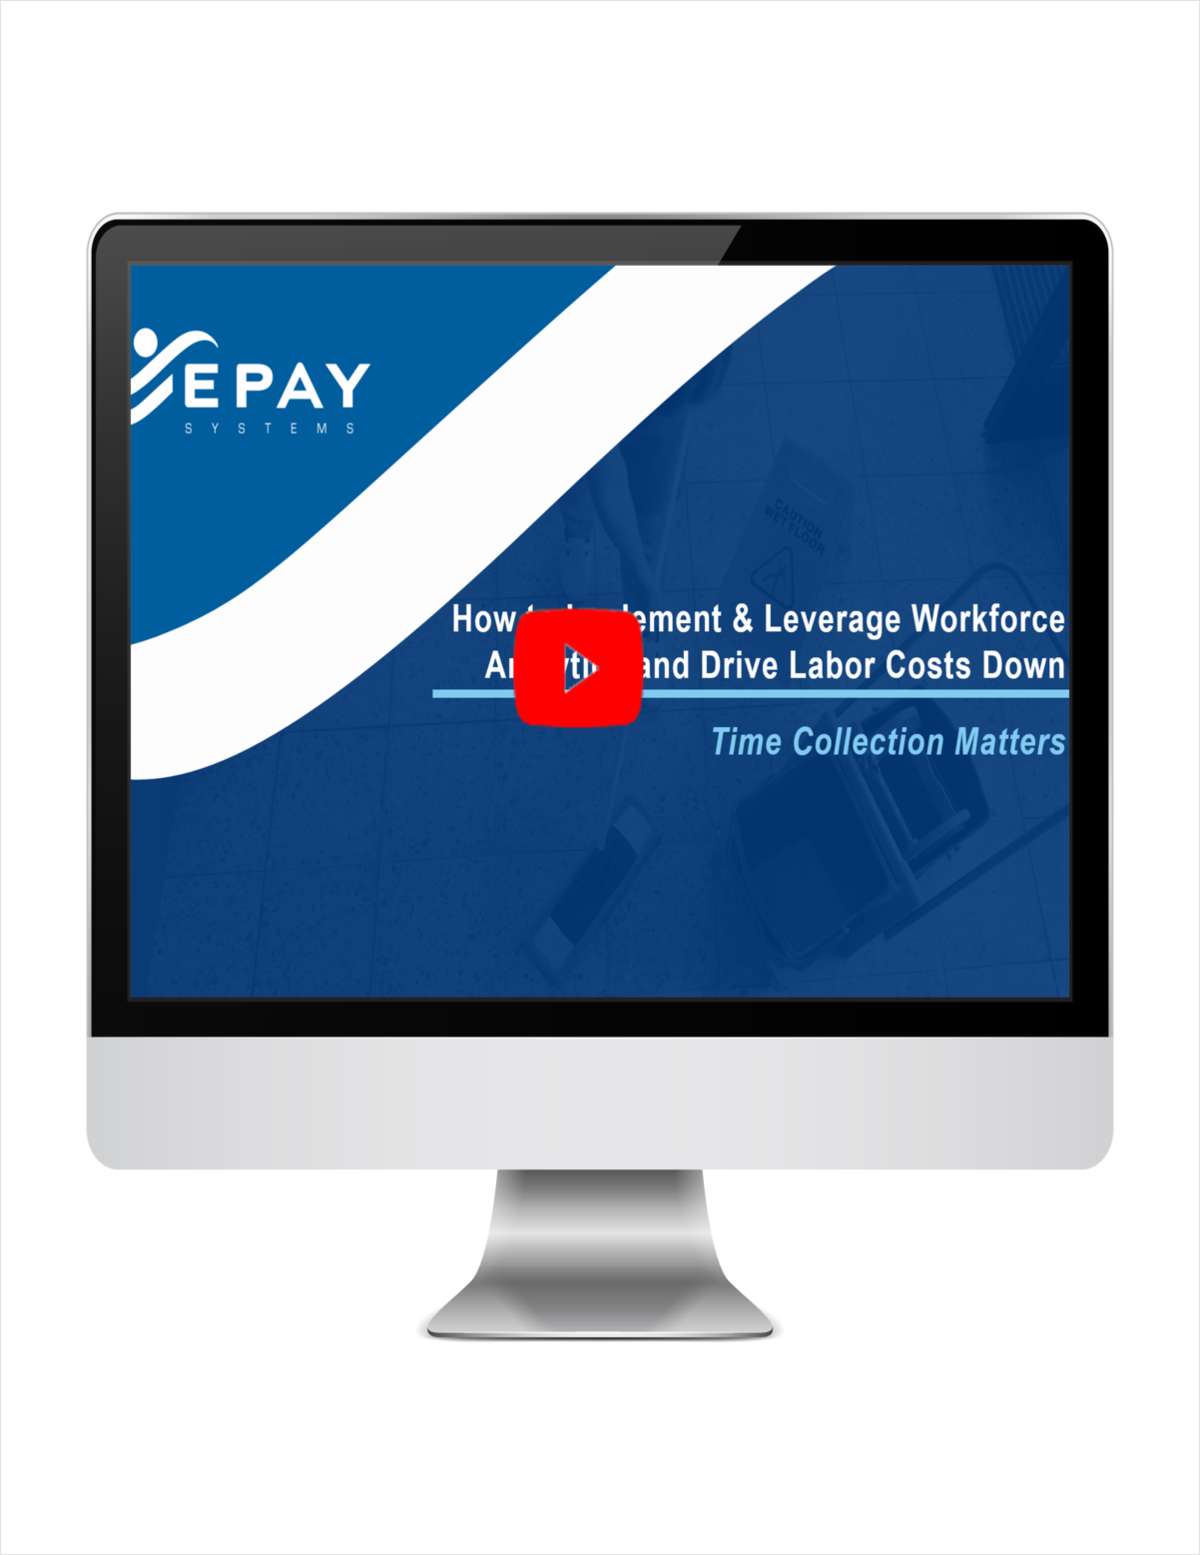 Webinar: How to Implement & Leverage Workforce Analytics to Drive Labor Costs Down